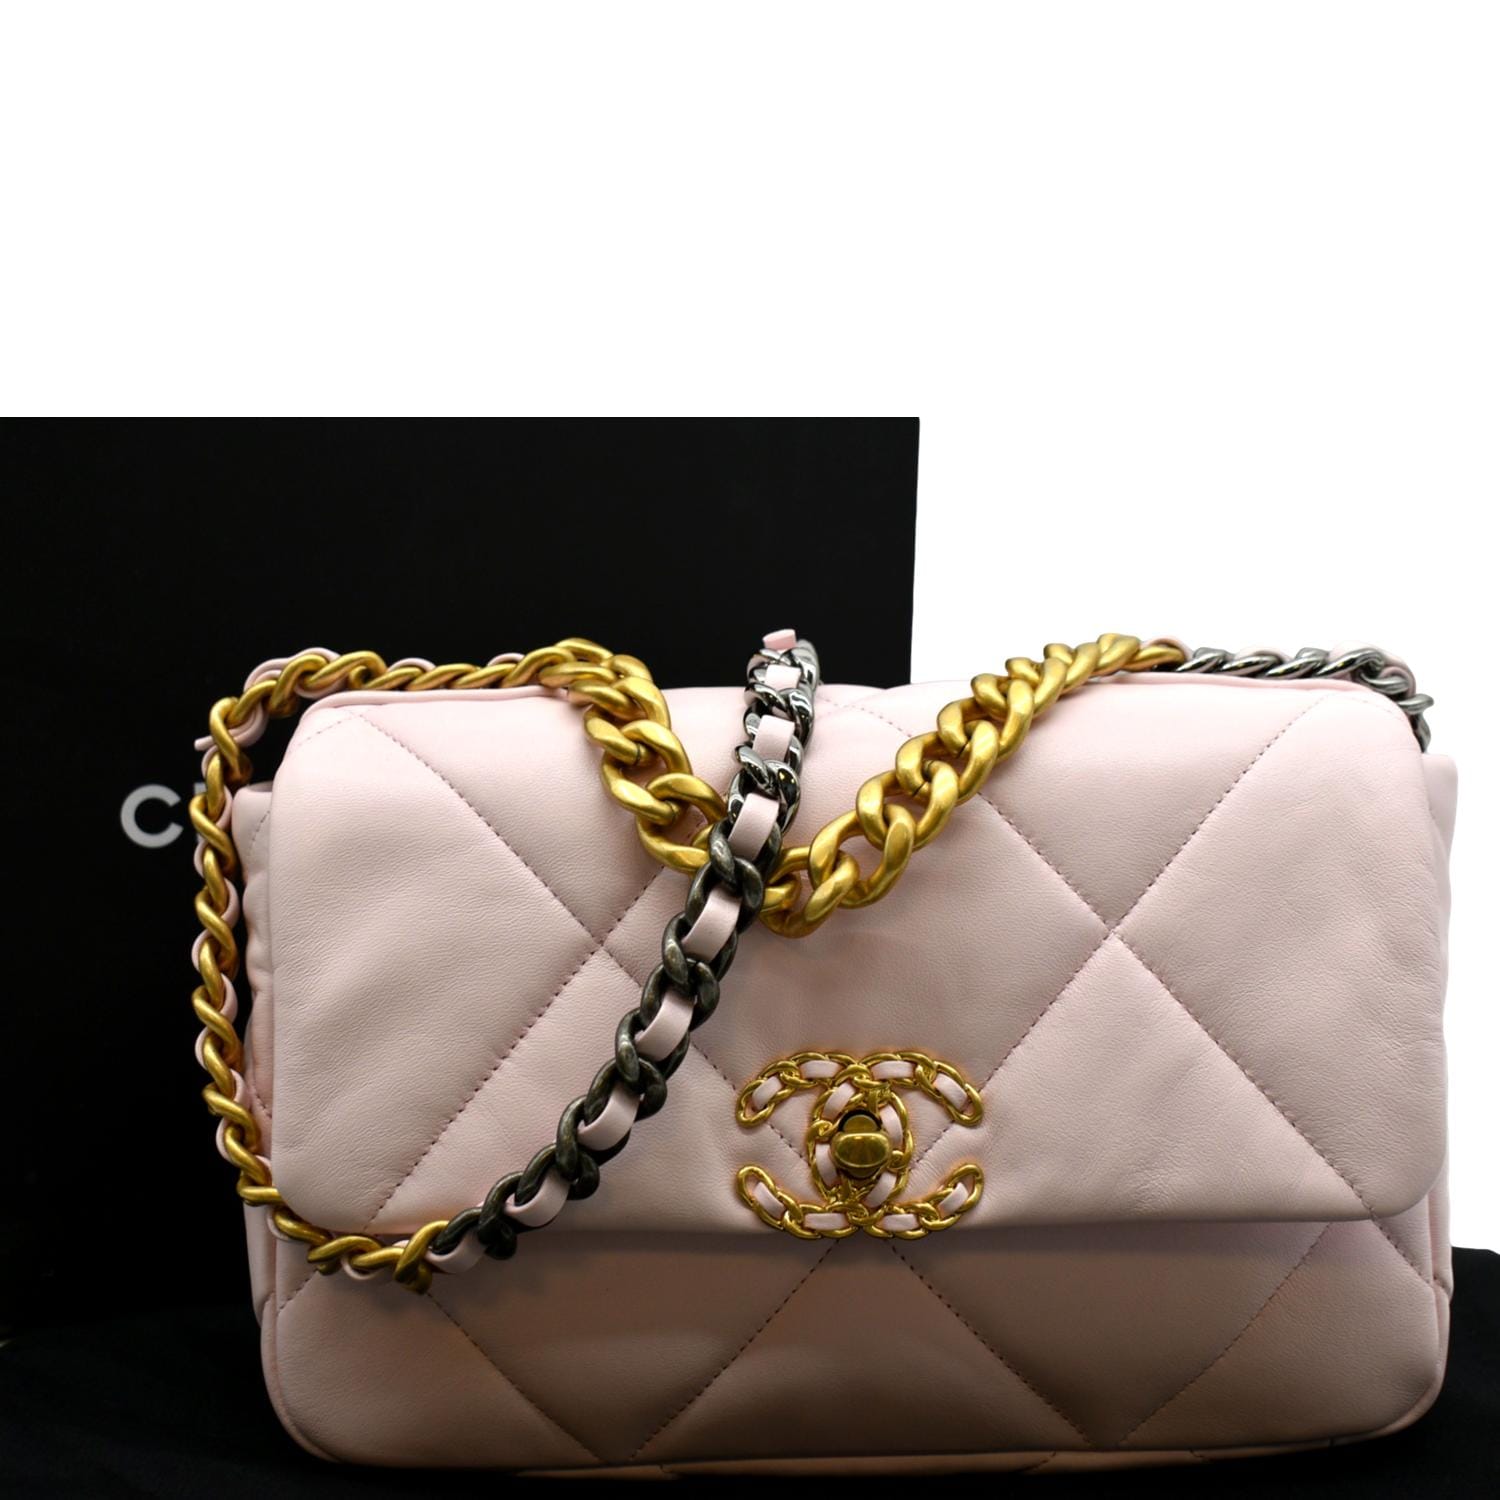 CHANEL 19 Small Flap Quilted Lambskin Leather Shoulder Bag Beige